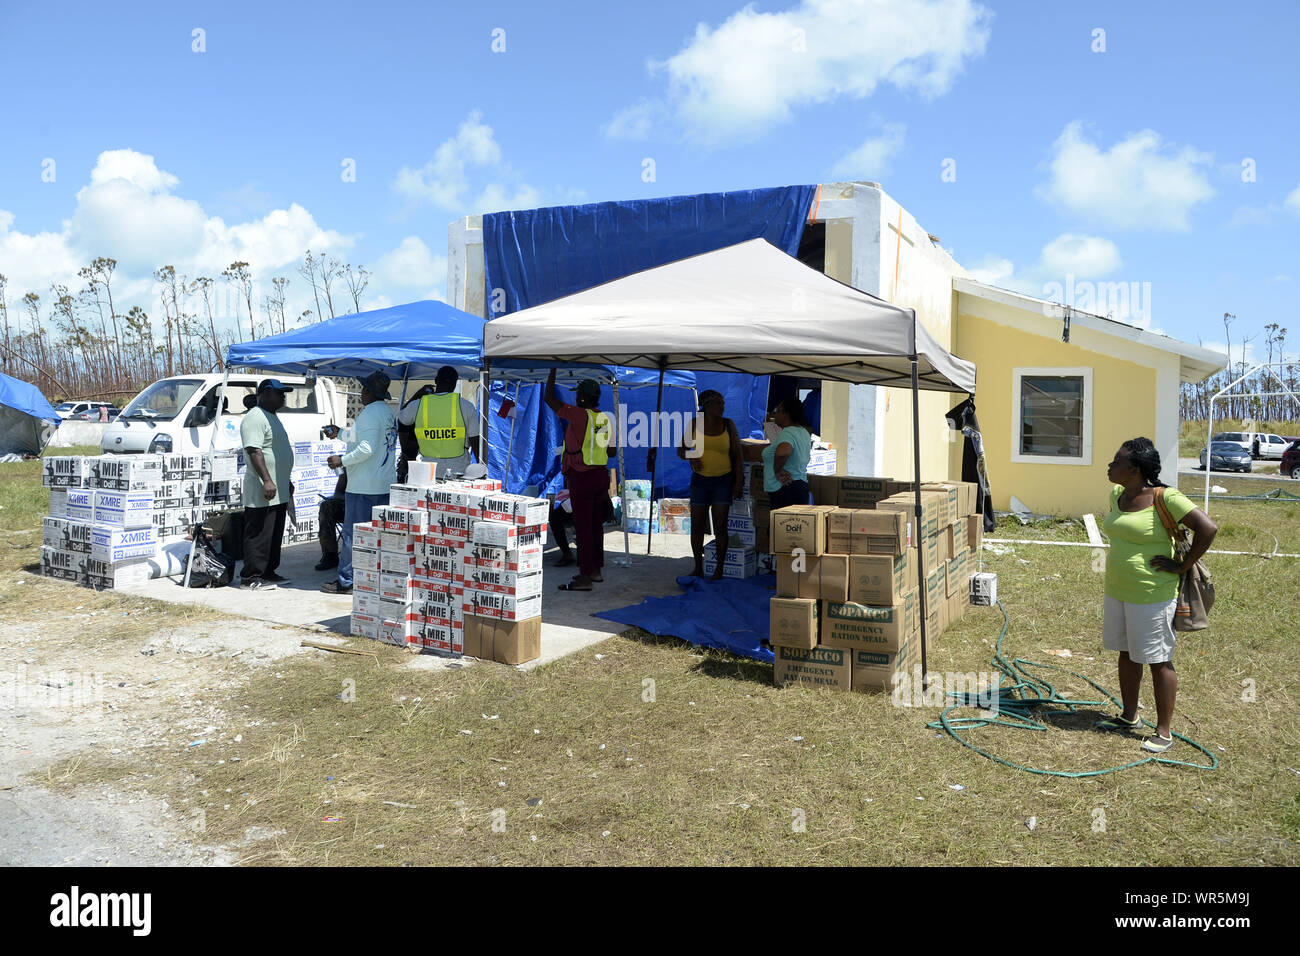 Treasure Cay, The Bahamas. 9th Sep 2019. MRE meal kits sit outside the damaged fire station at Treasure Cay Airport in the Bahamas on September 9, 2019. The stop on Treasure Cay, The Bahamas was conducted to provide consumable and medical products to the local population. The visit was coordinated by "Shipwreck Park", a 501 (c) (3) corporation which is responsible for the acceptance and distribution of relief goods, consumables and medical supplies for the island chain. Credit: UPI/Alamy Live News Stock Photo